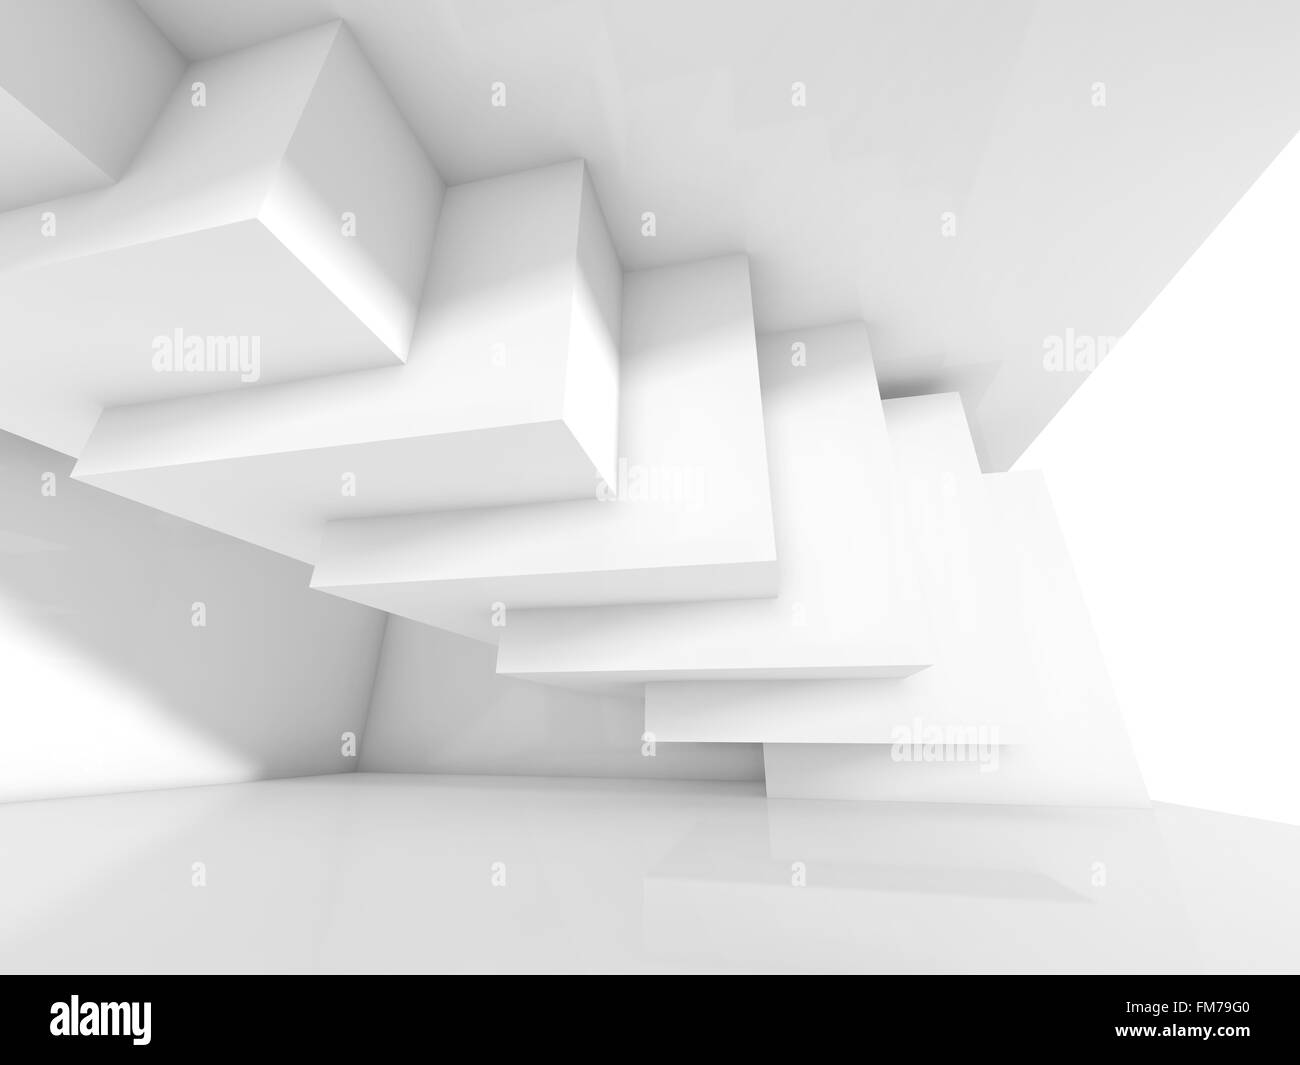 Abstract white interior with intersected cubes installation. Empty architecture background, 3d illustration Stock Photo